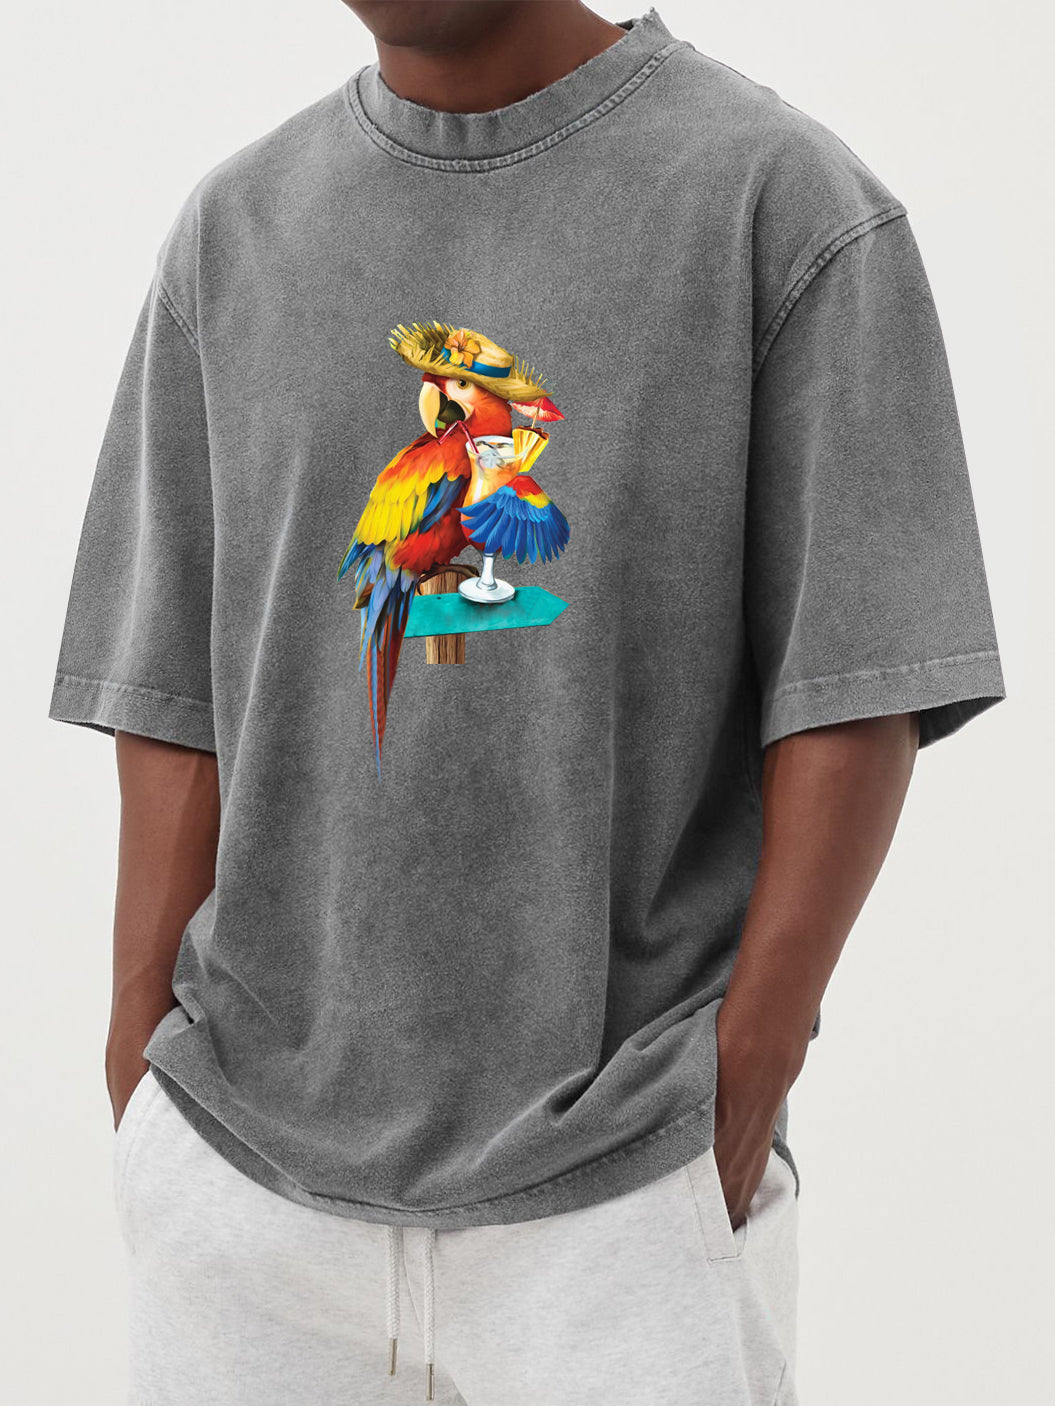 Men's Parrot Cocktail Hawaiian Print Washed Distressed Cotton T-Shirt Top